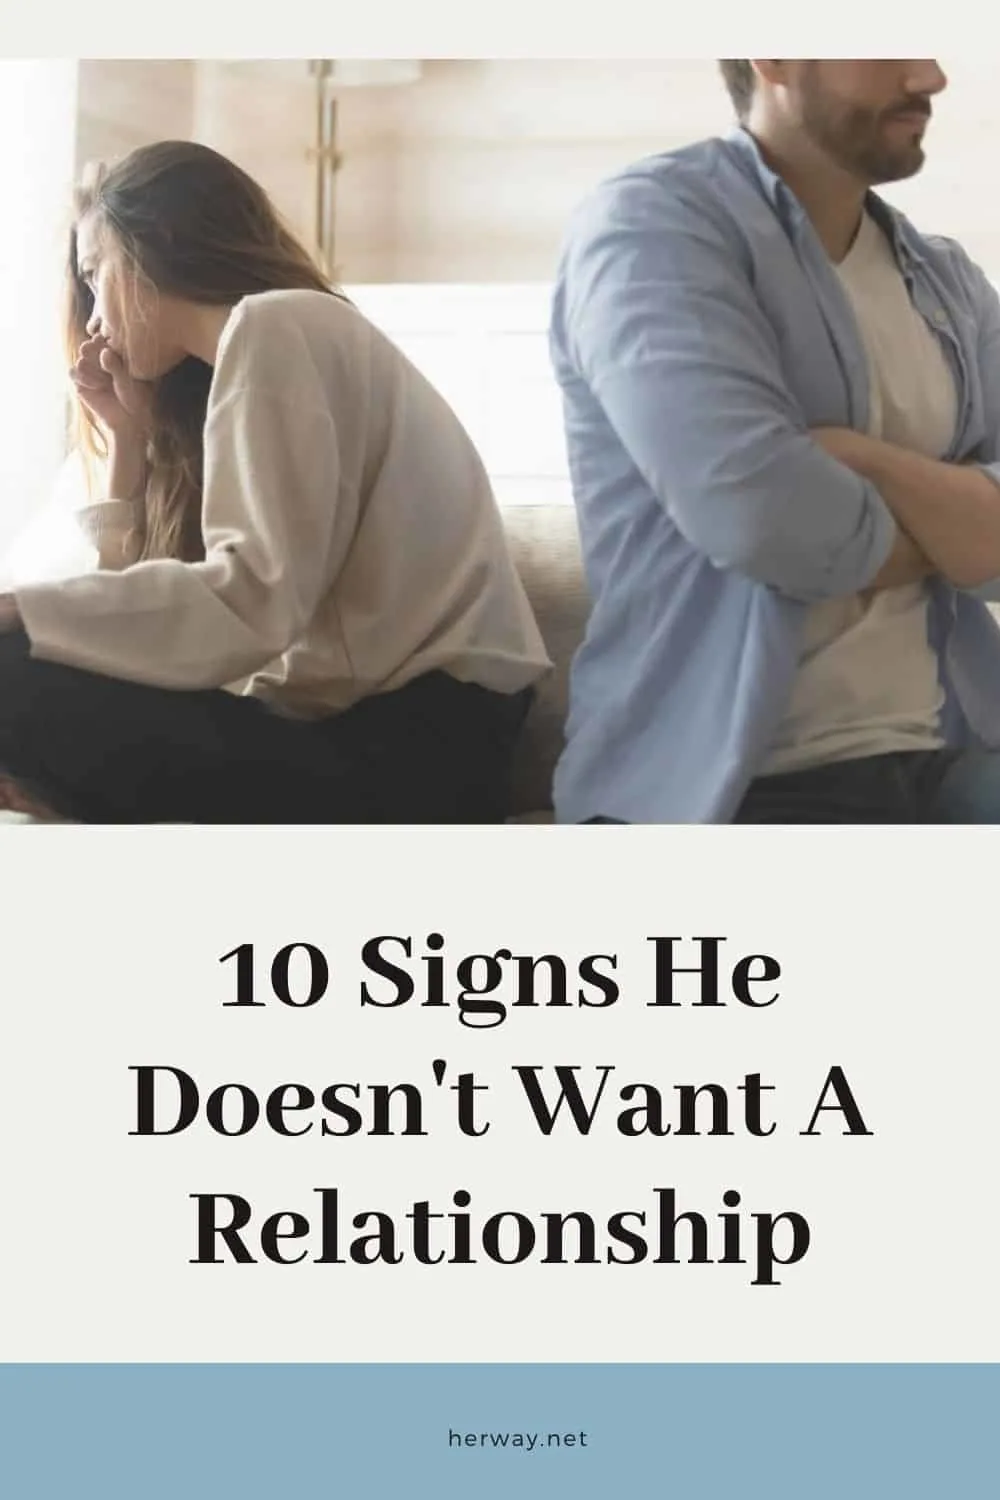 10 Signs He Doesn't Want A Relationship